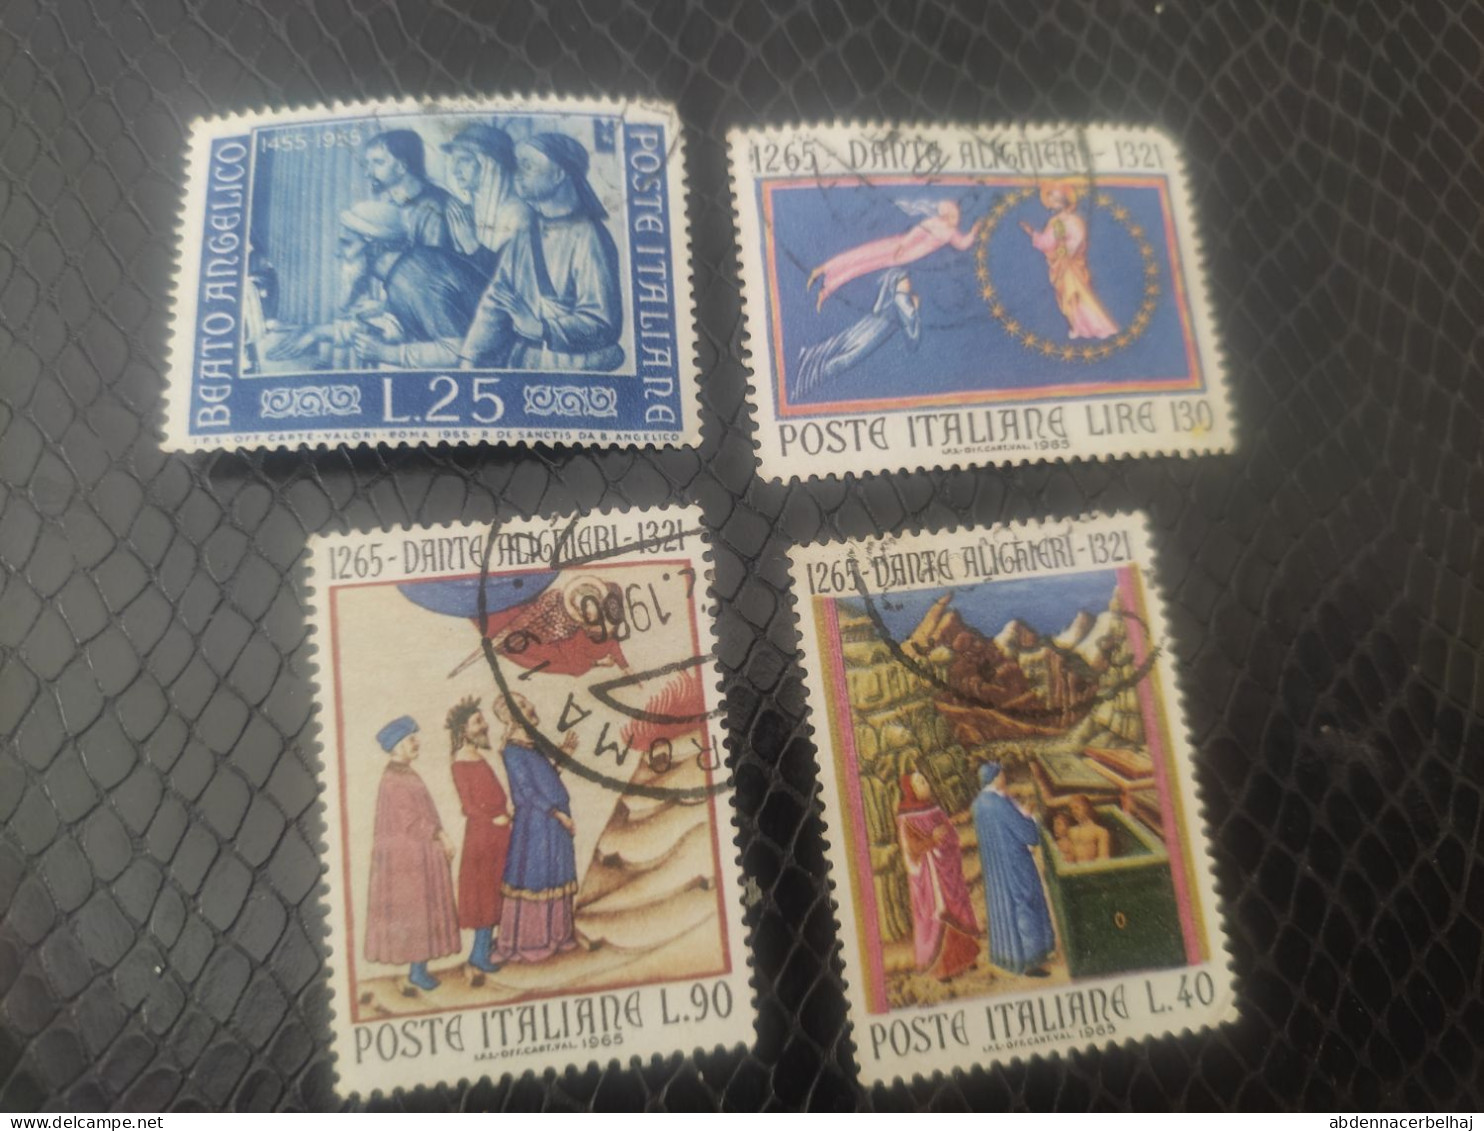 Timbres italiens Années 50